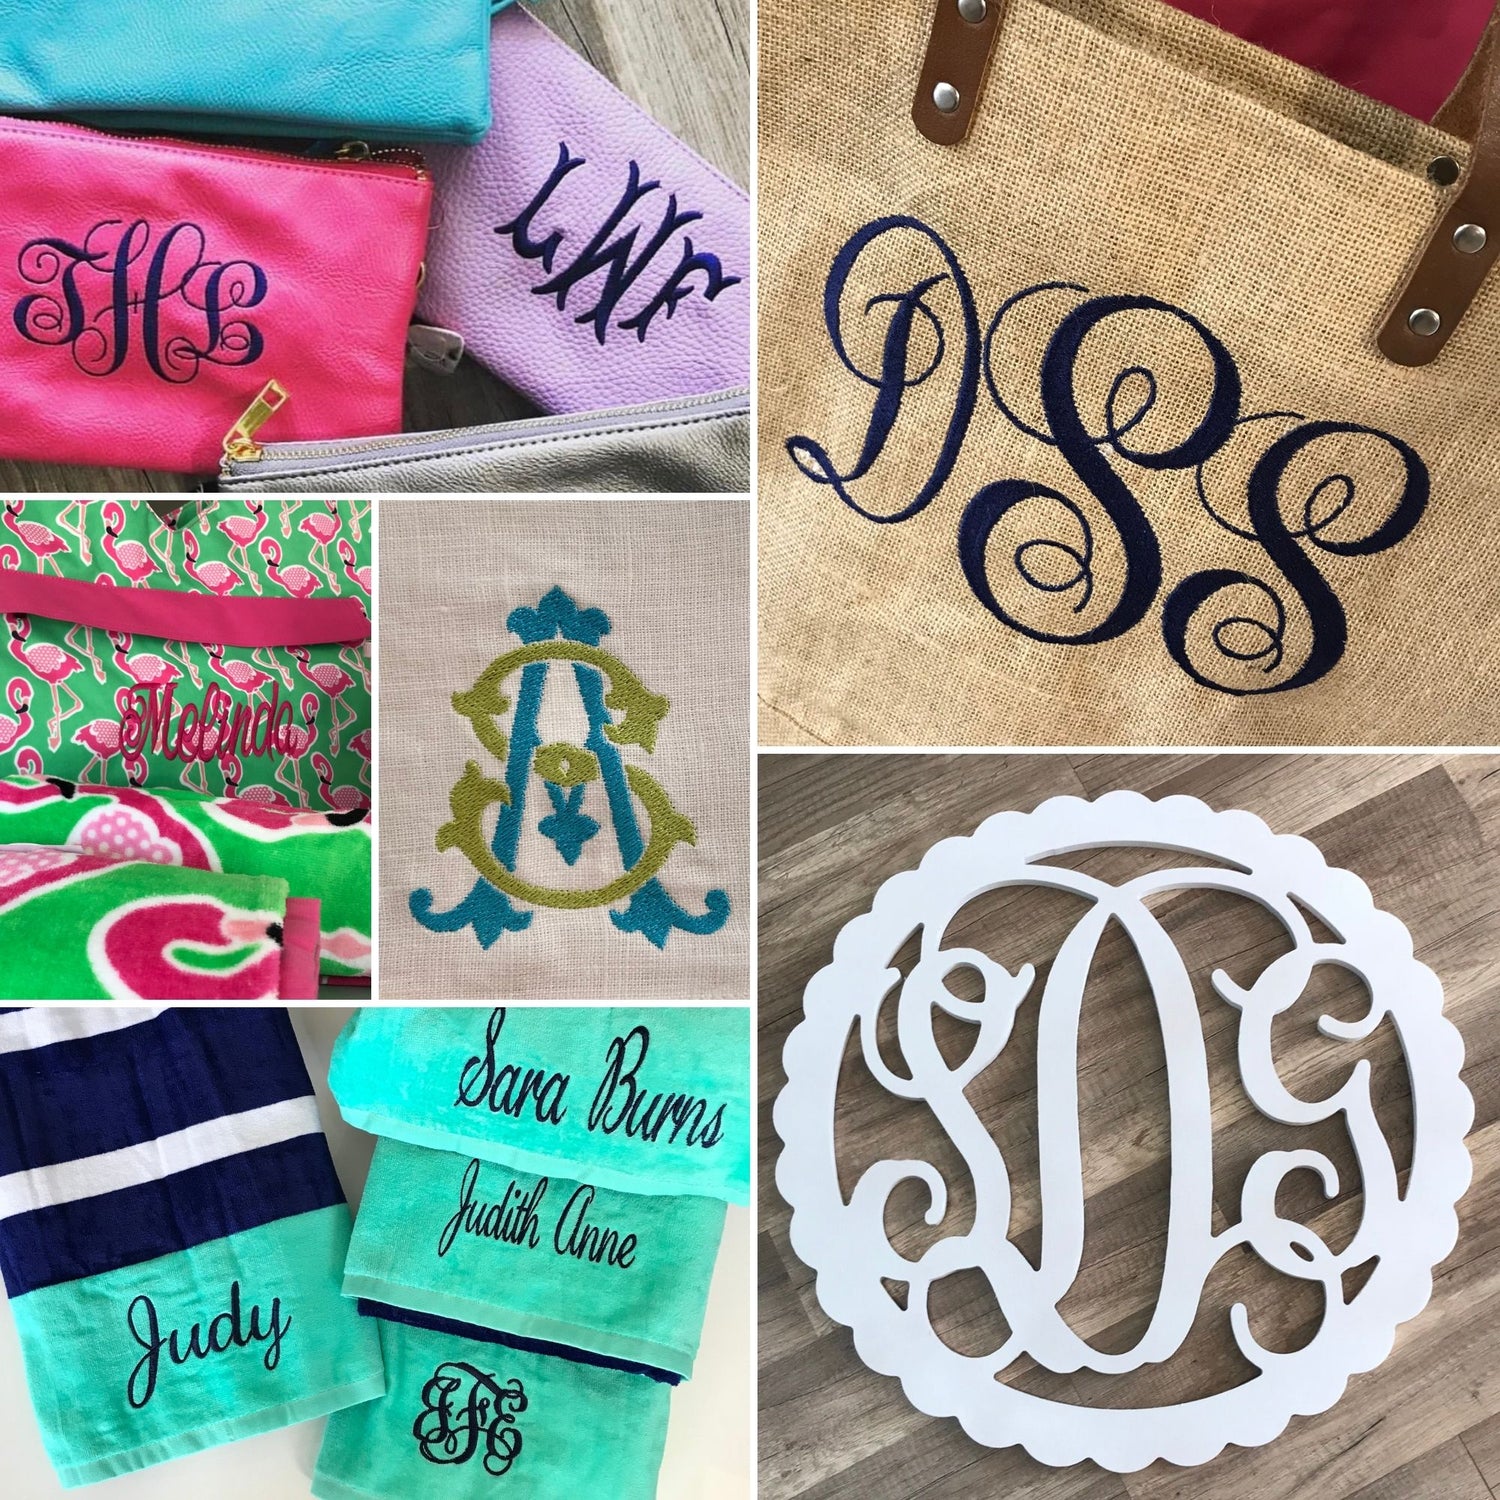 Charmed Beauty & Gifts has Monograms and Personalized gifts by the dozen. Bring your own item to be monogrammed or buy one of ours. Fast Monogramming available. 